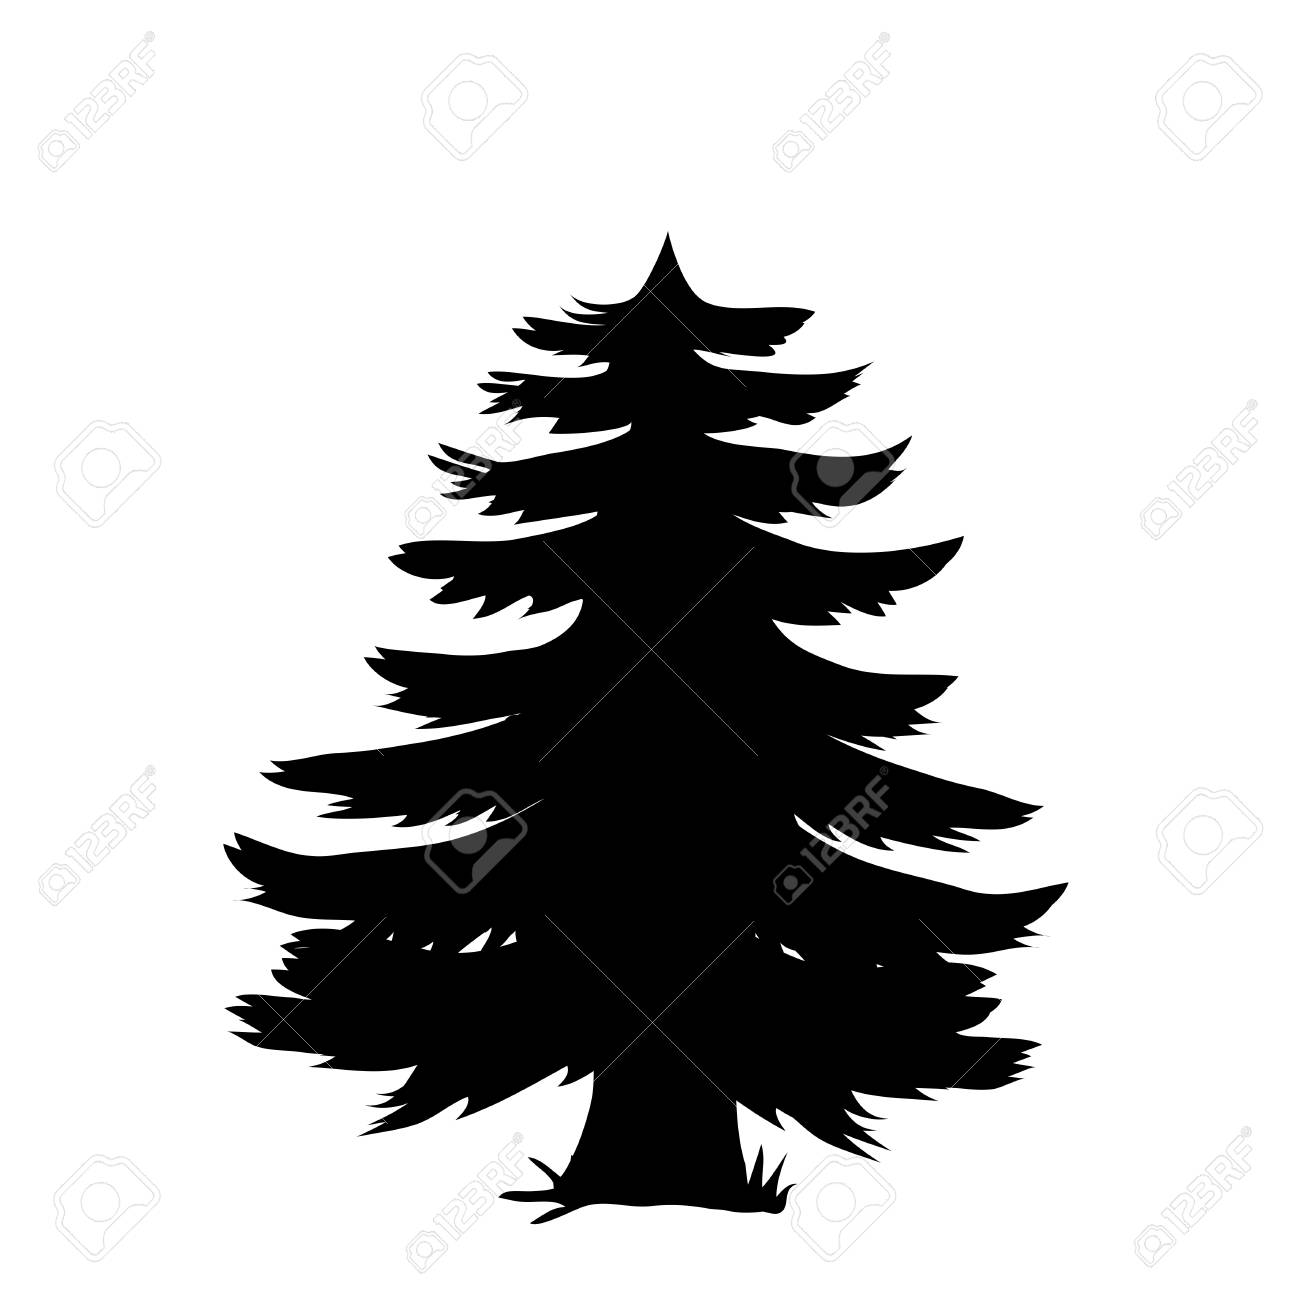 Black Silhouette Of Pine Tree Icon Isolated On White Background